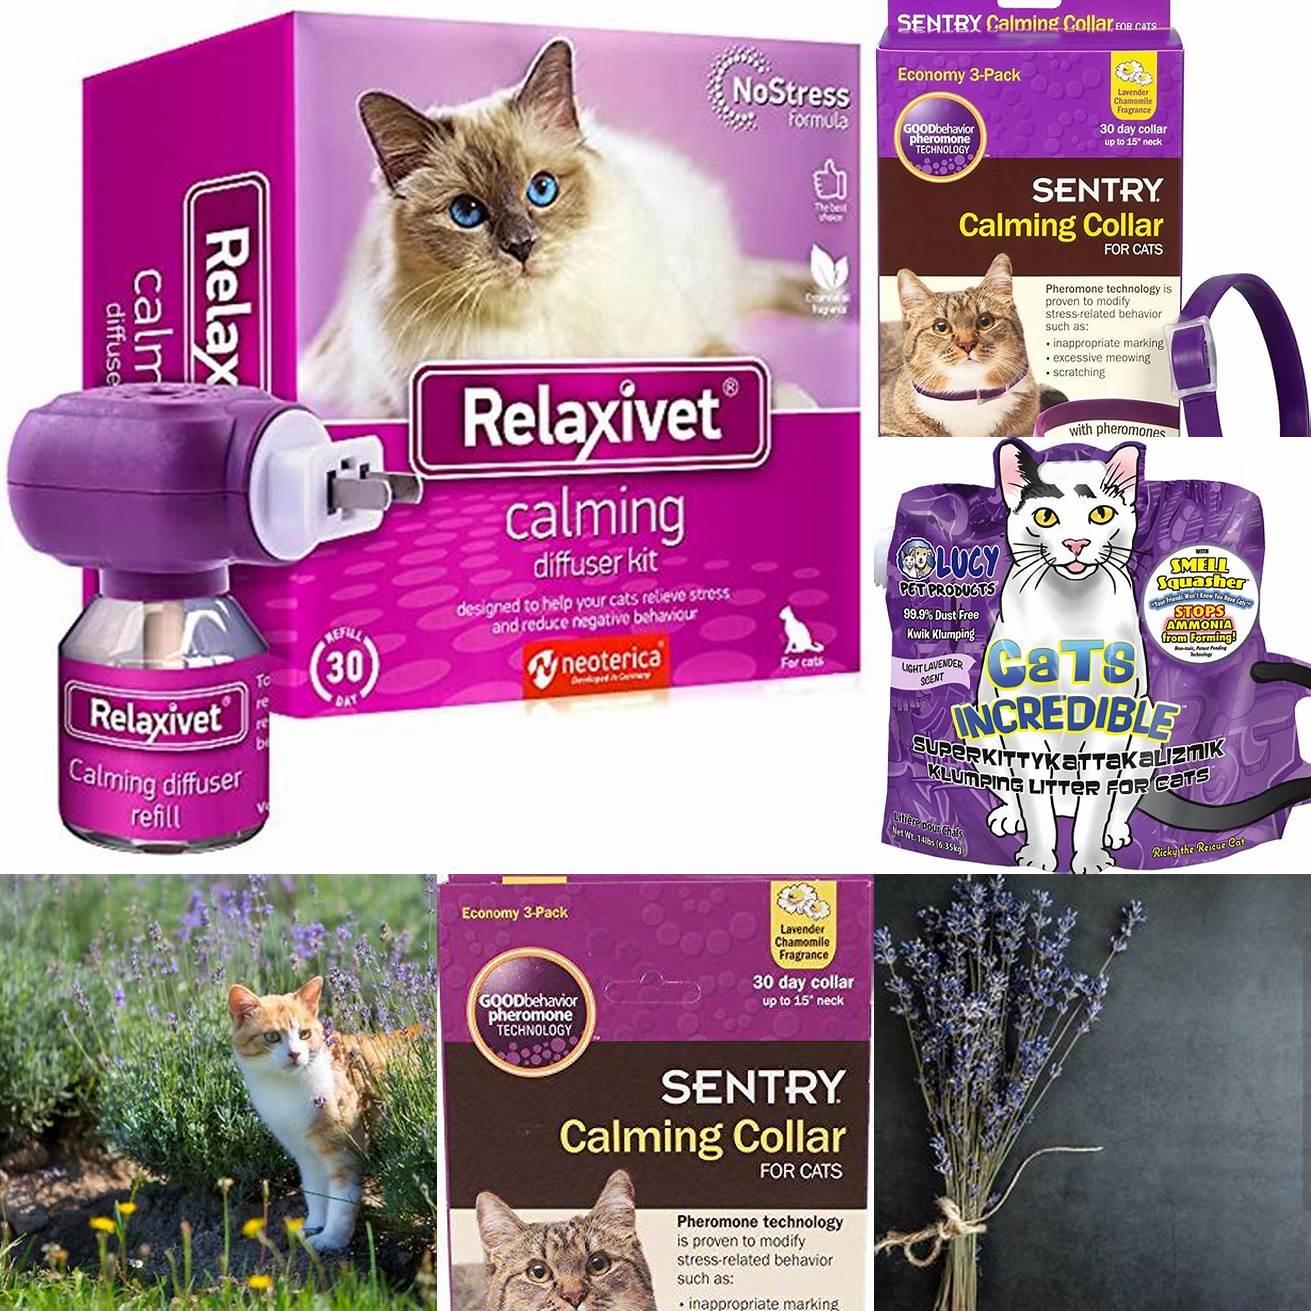 Watch your cats behavior around lavender products